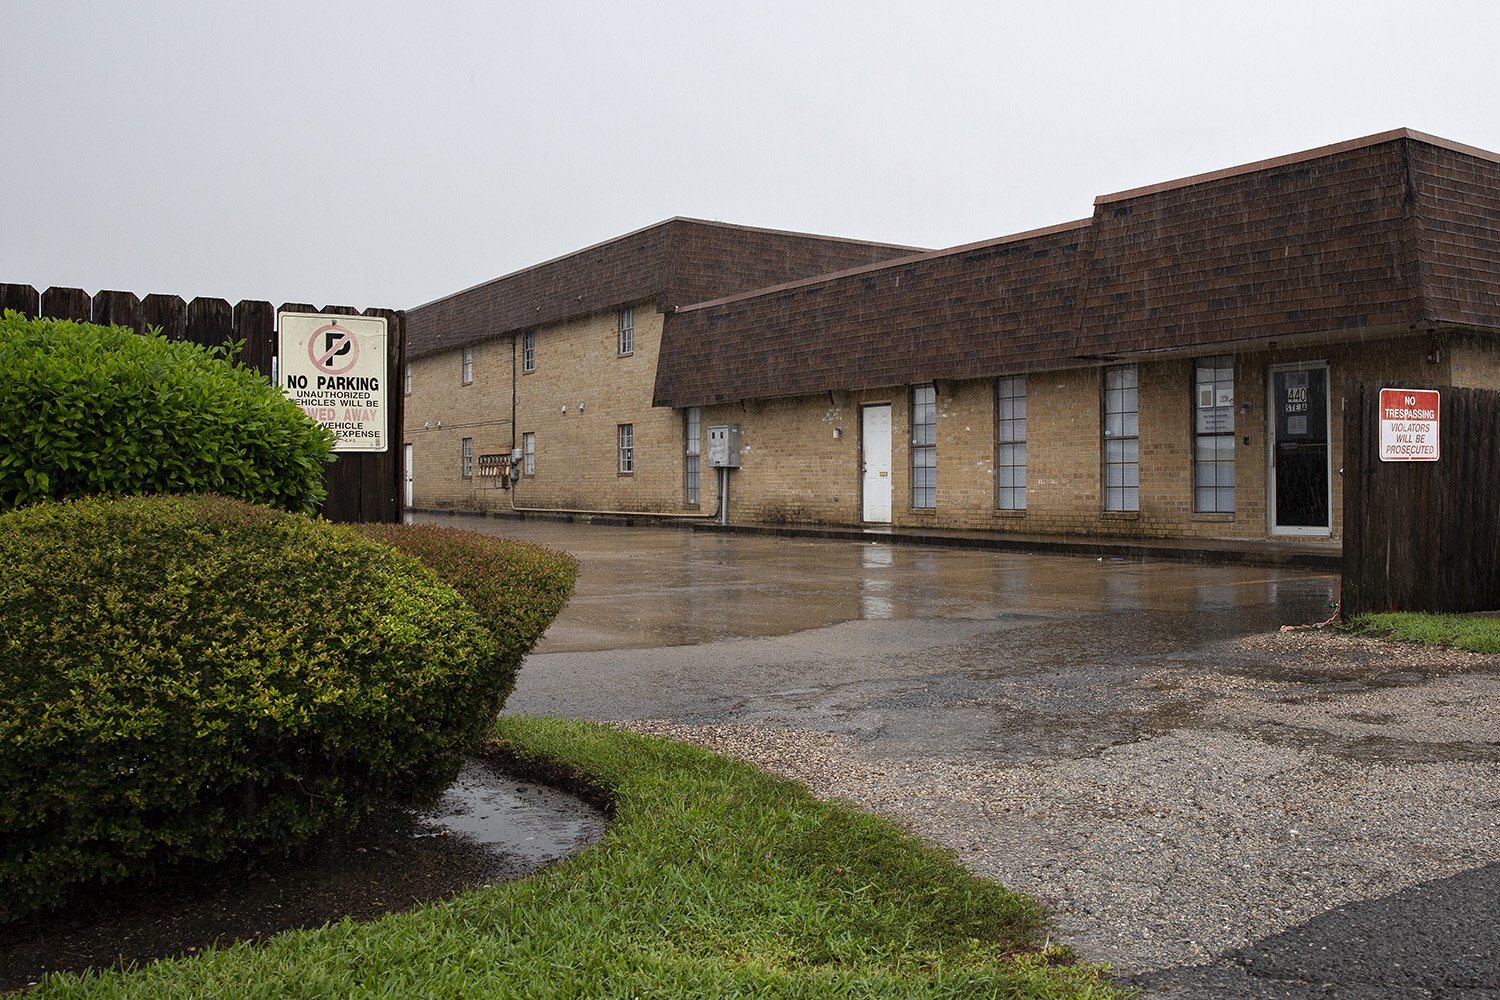 The Texas abortion provider Whole Woman's Health ran a clinic in Beaumont until 2014. It was the only place to get an abortion between Houston and Baton Rouge. 